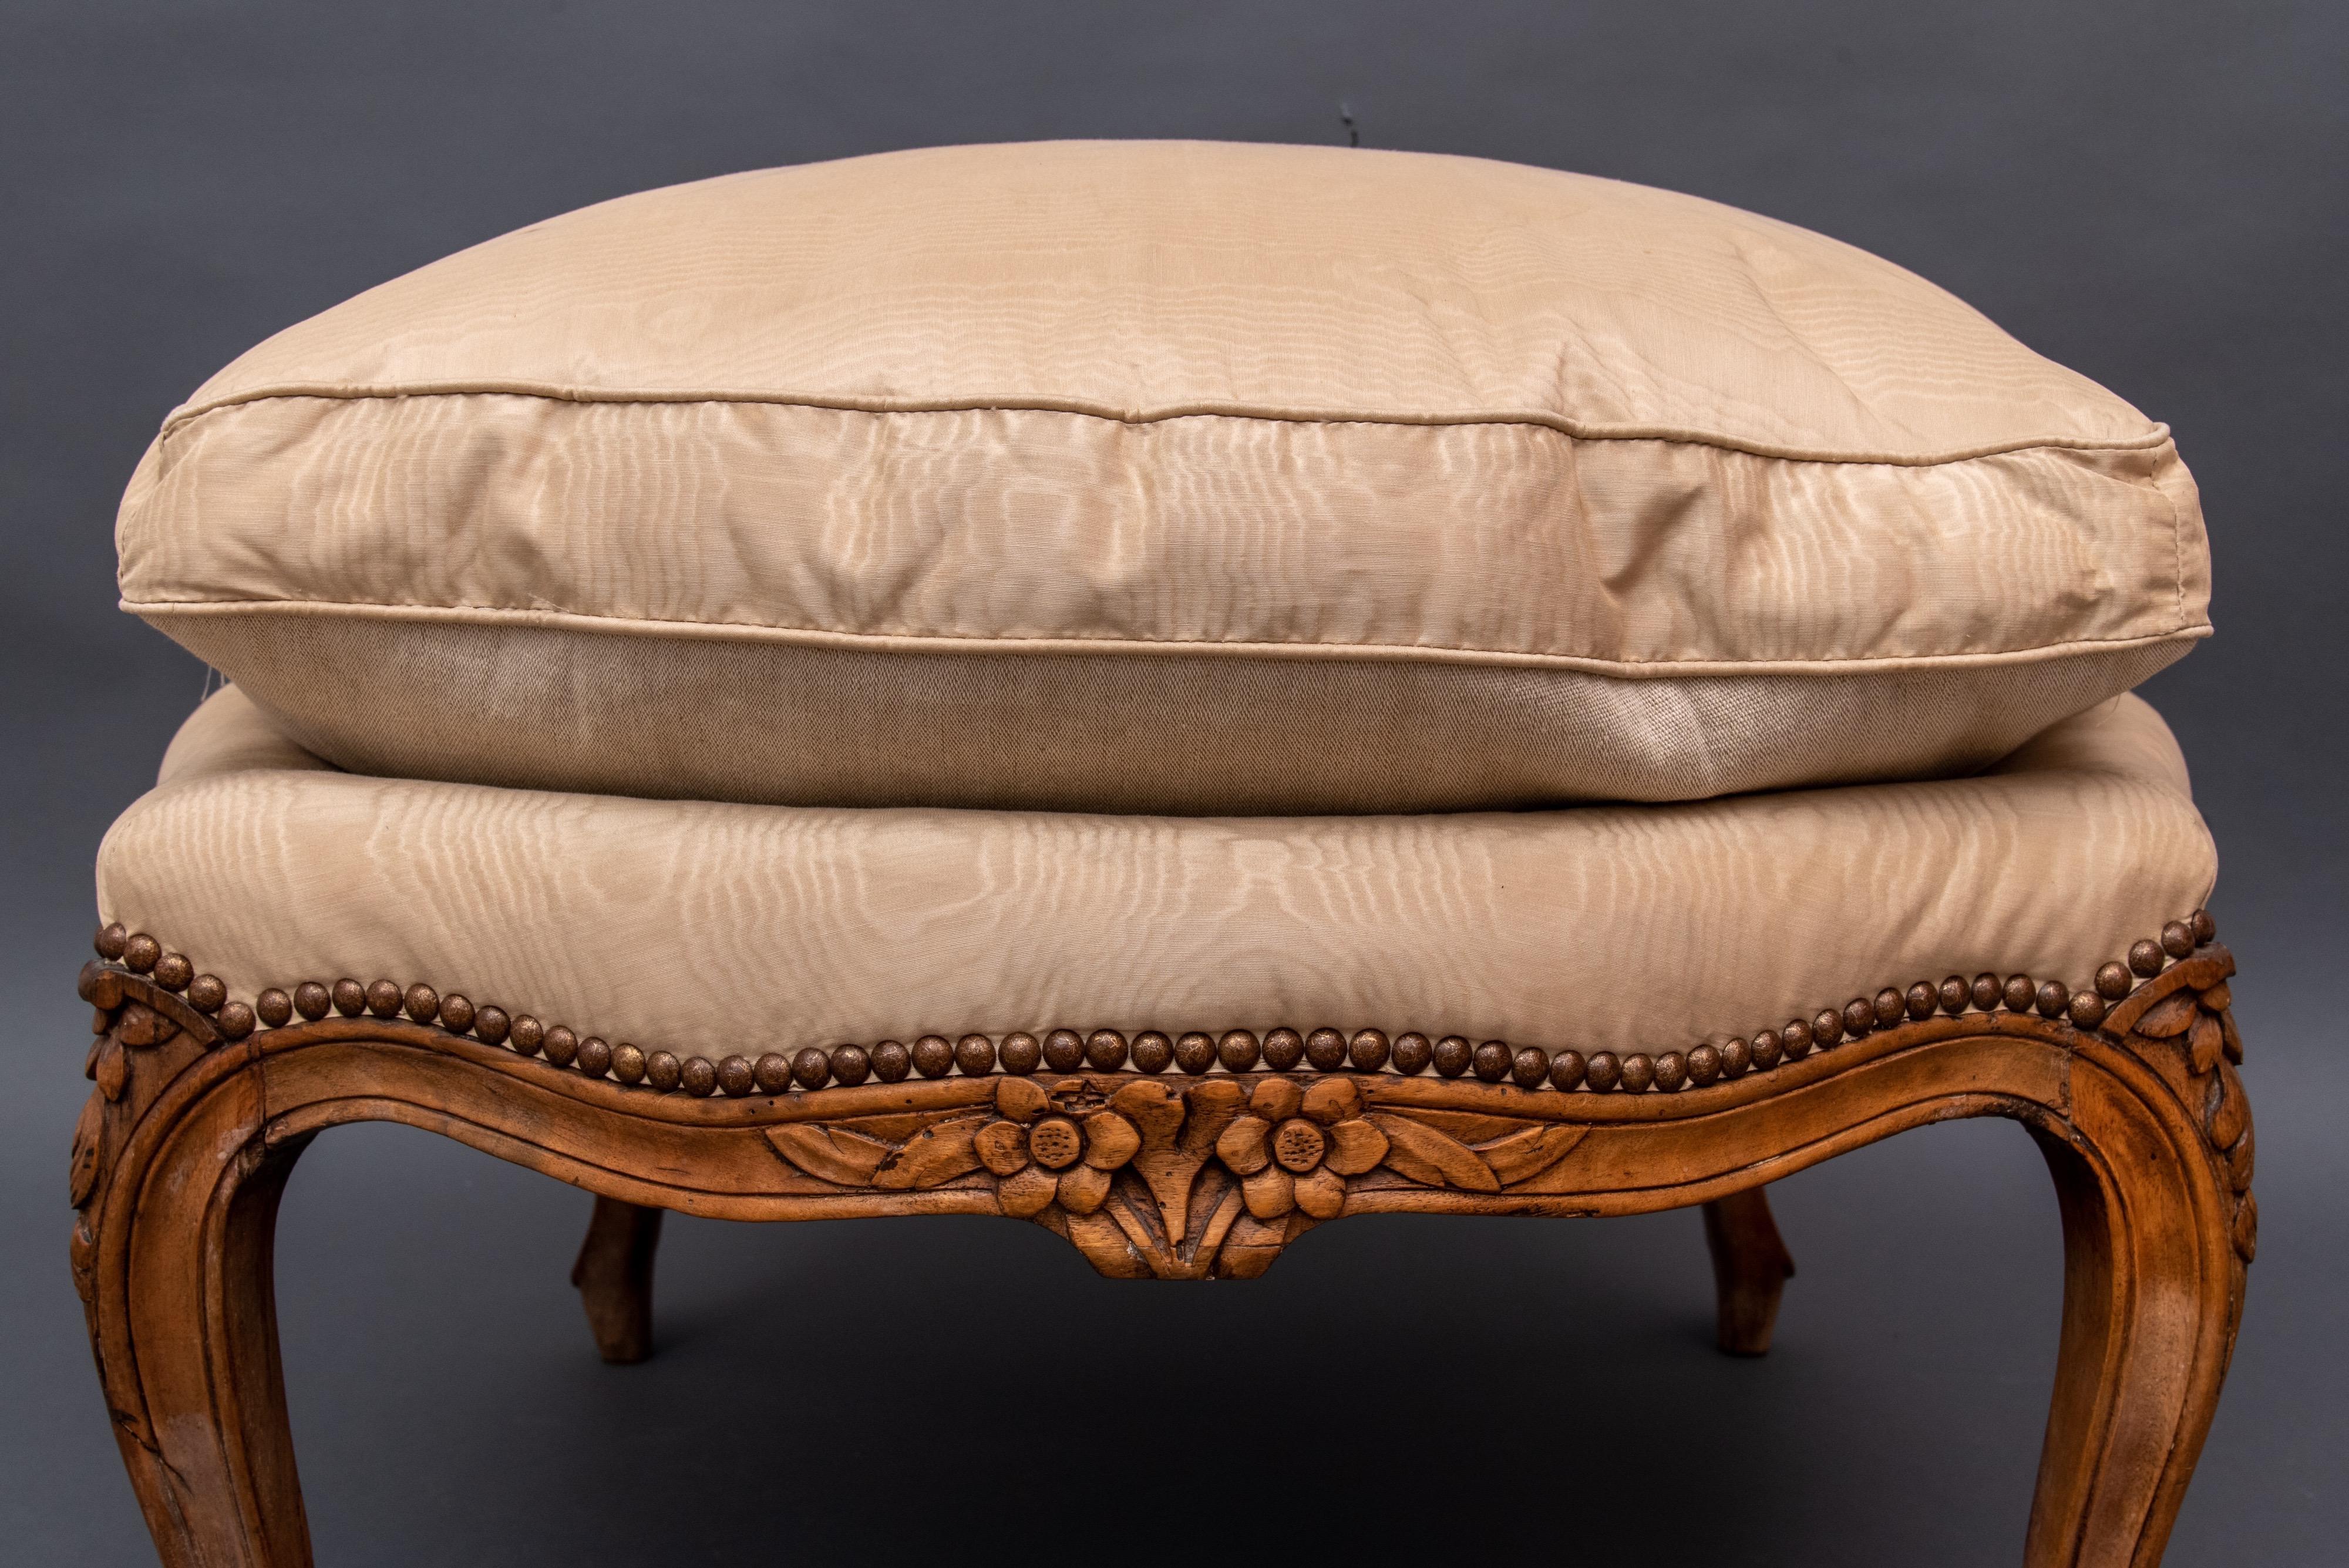 Huge mid-19th century French footrest in oakwood with fine, hand carved details. The pad has some stains on the fabric. It makes a great accent for any room.



This artwork is shipped from Rome. Under existing legislation, any artwork in Italy